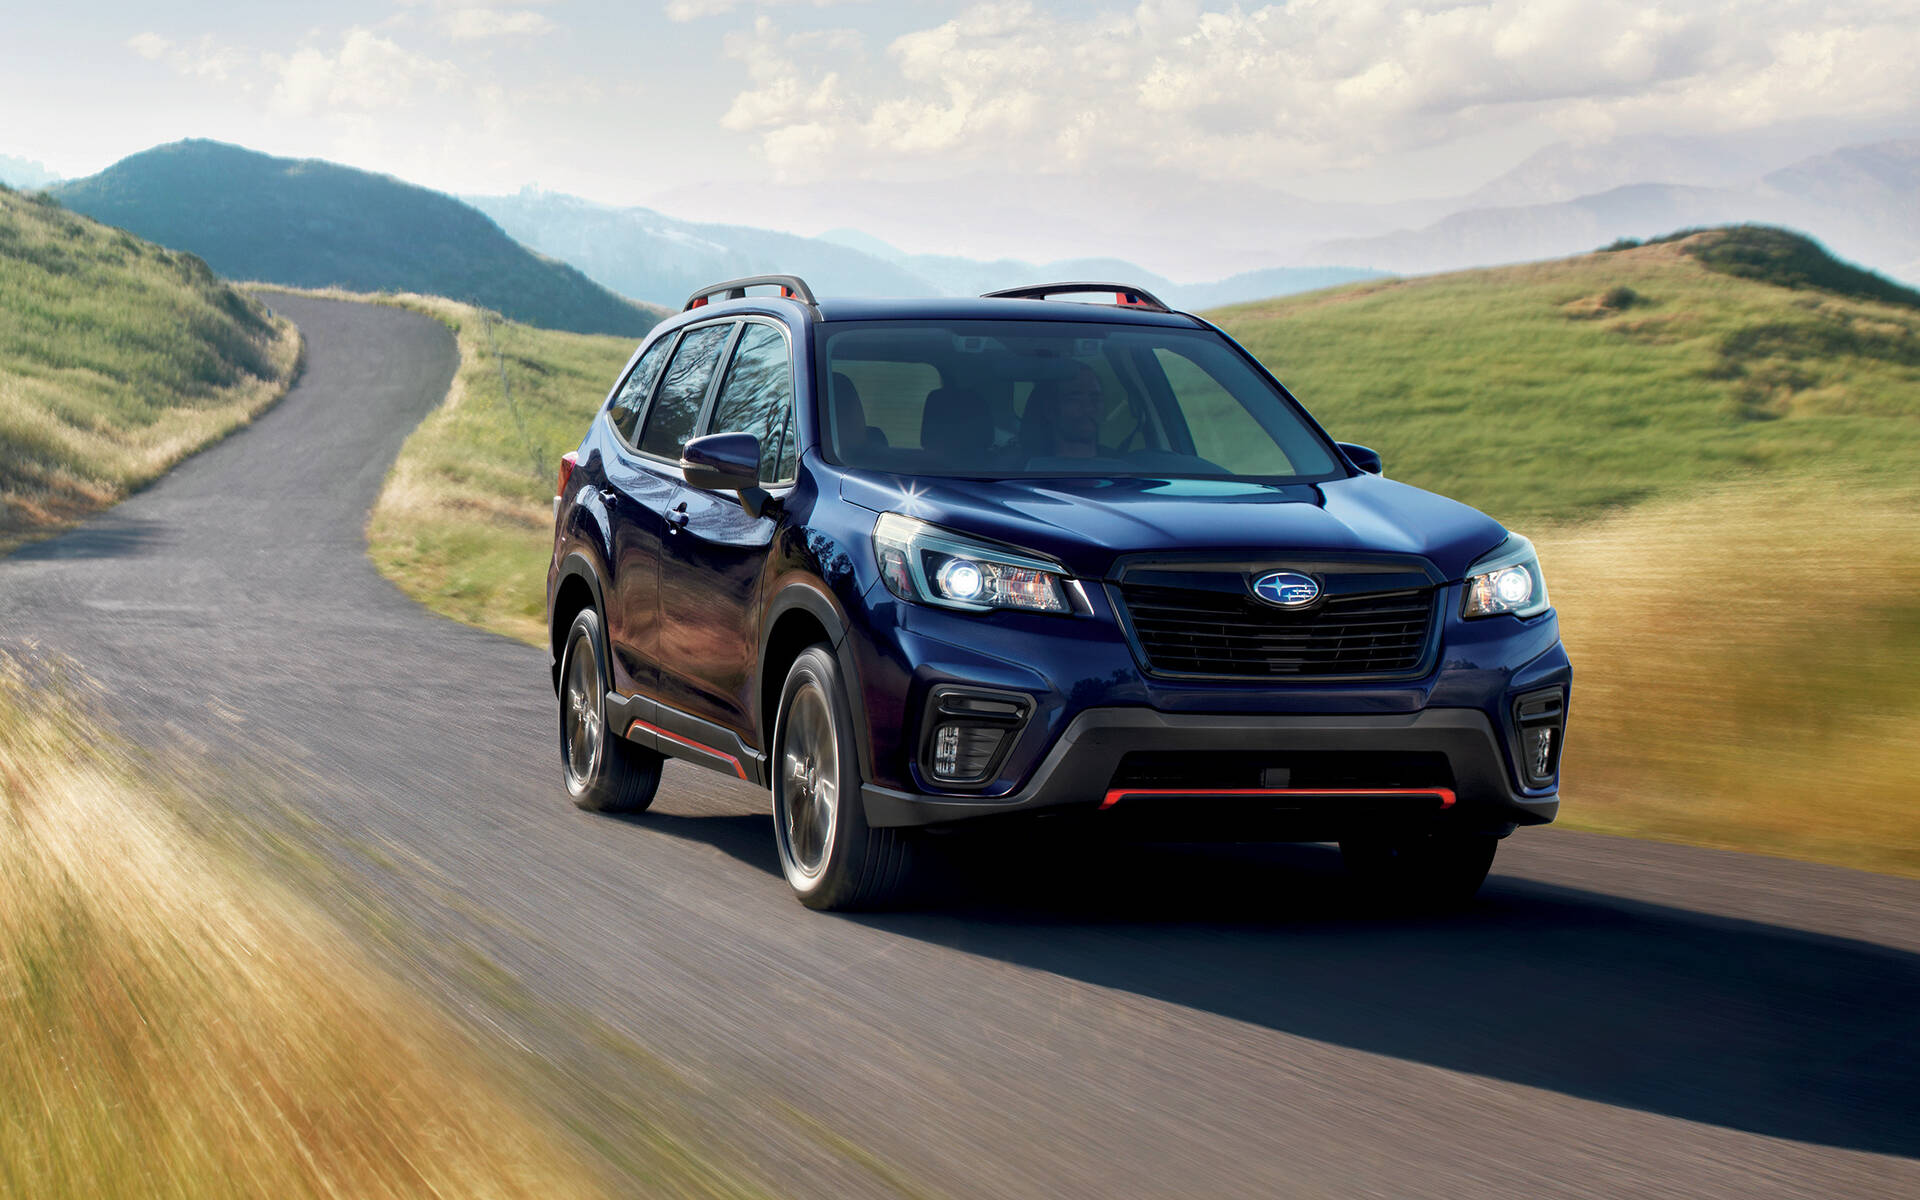 2021 Subaru Forester Rating The Car Guide